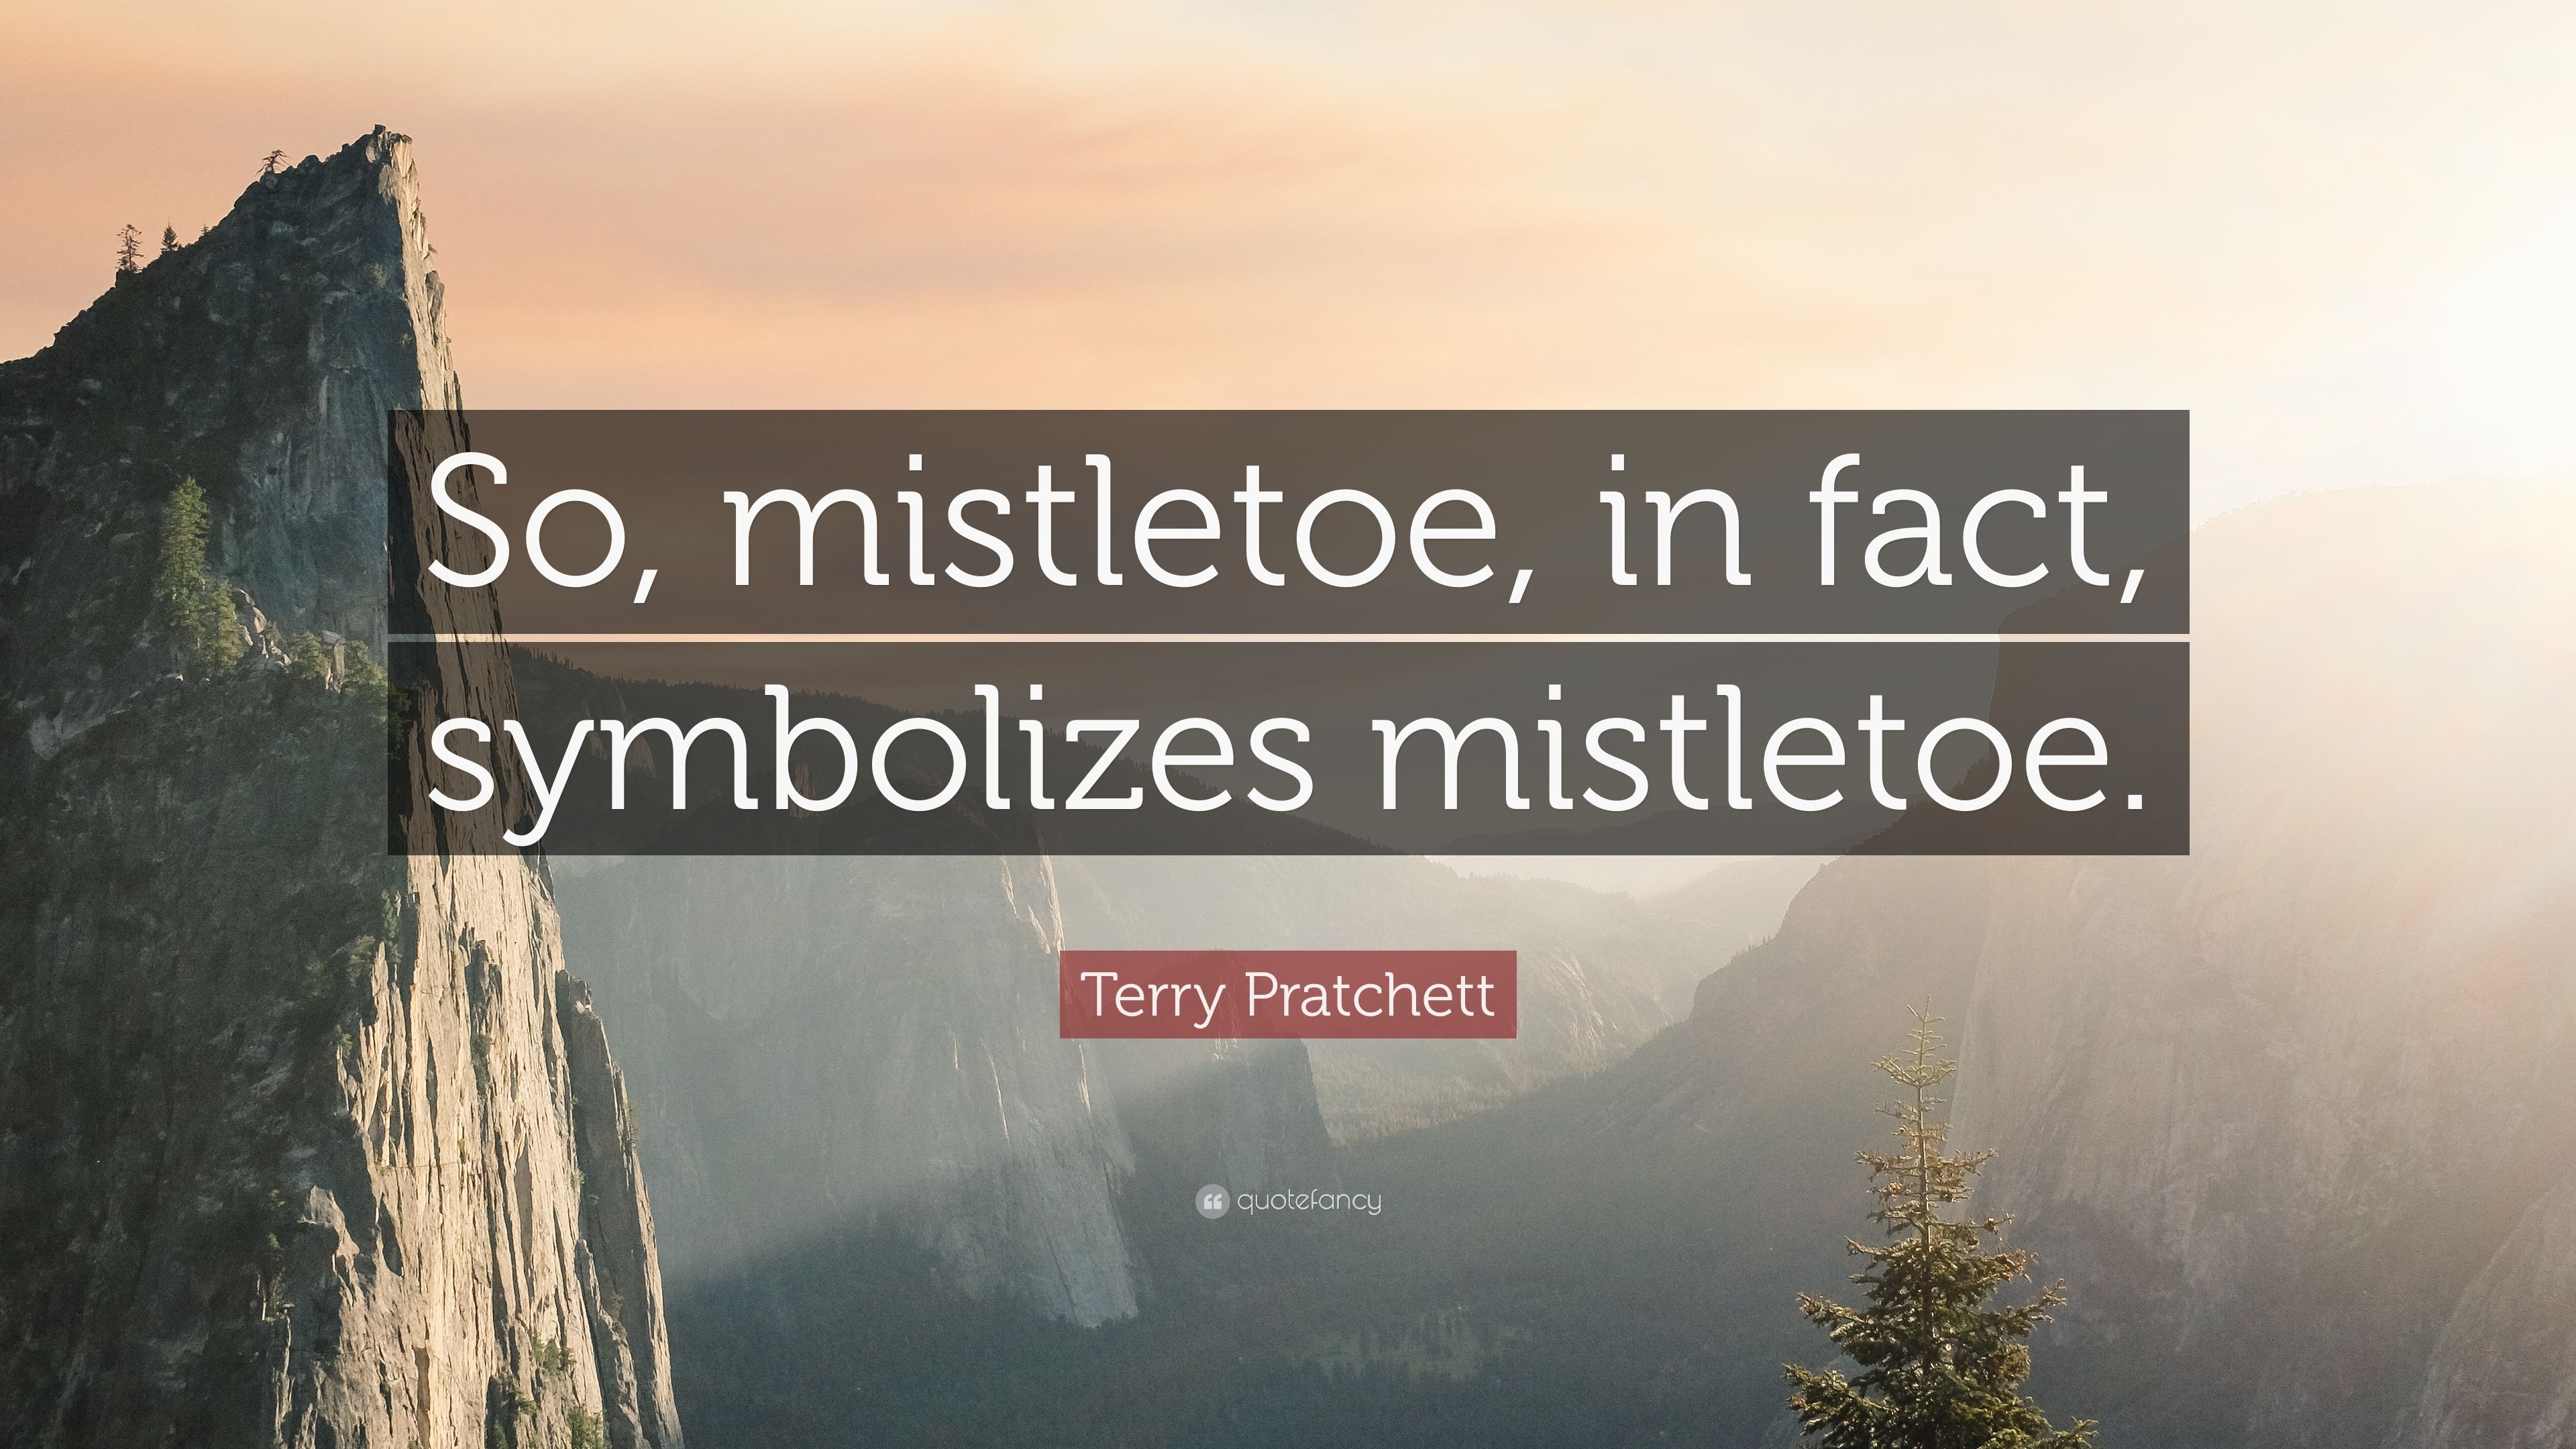 Terry Pratchett Quote - Assume Nothing Question Everything - HD Wallpaper 